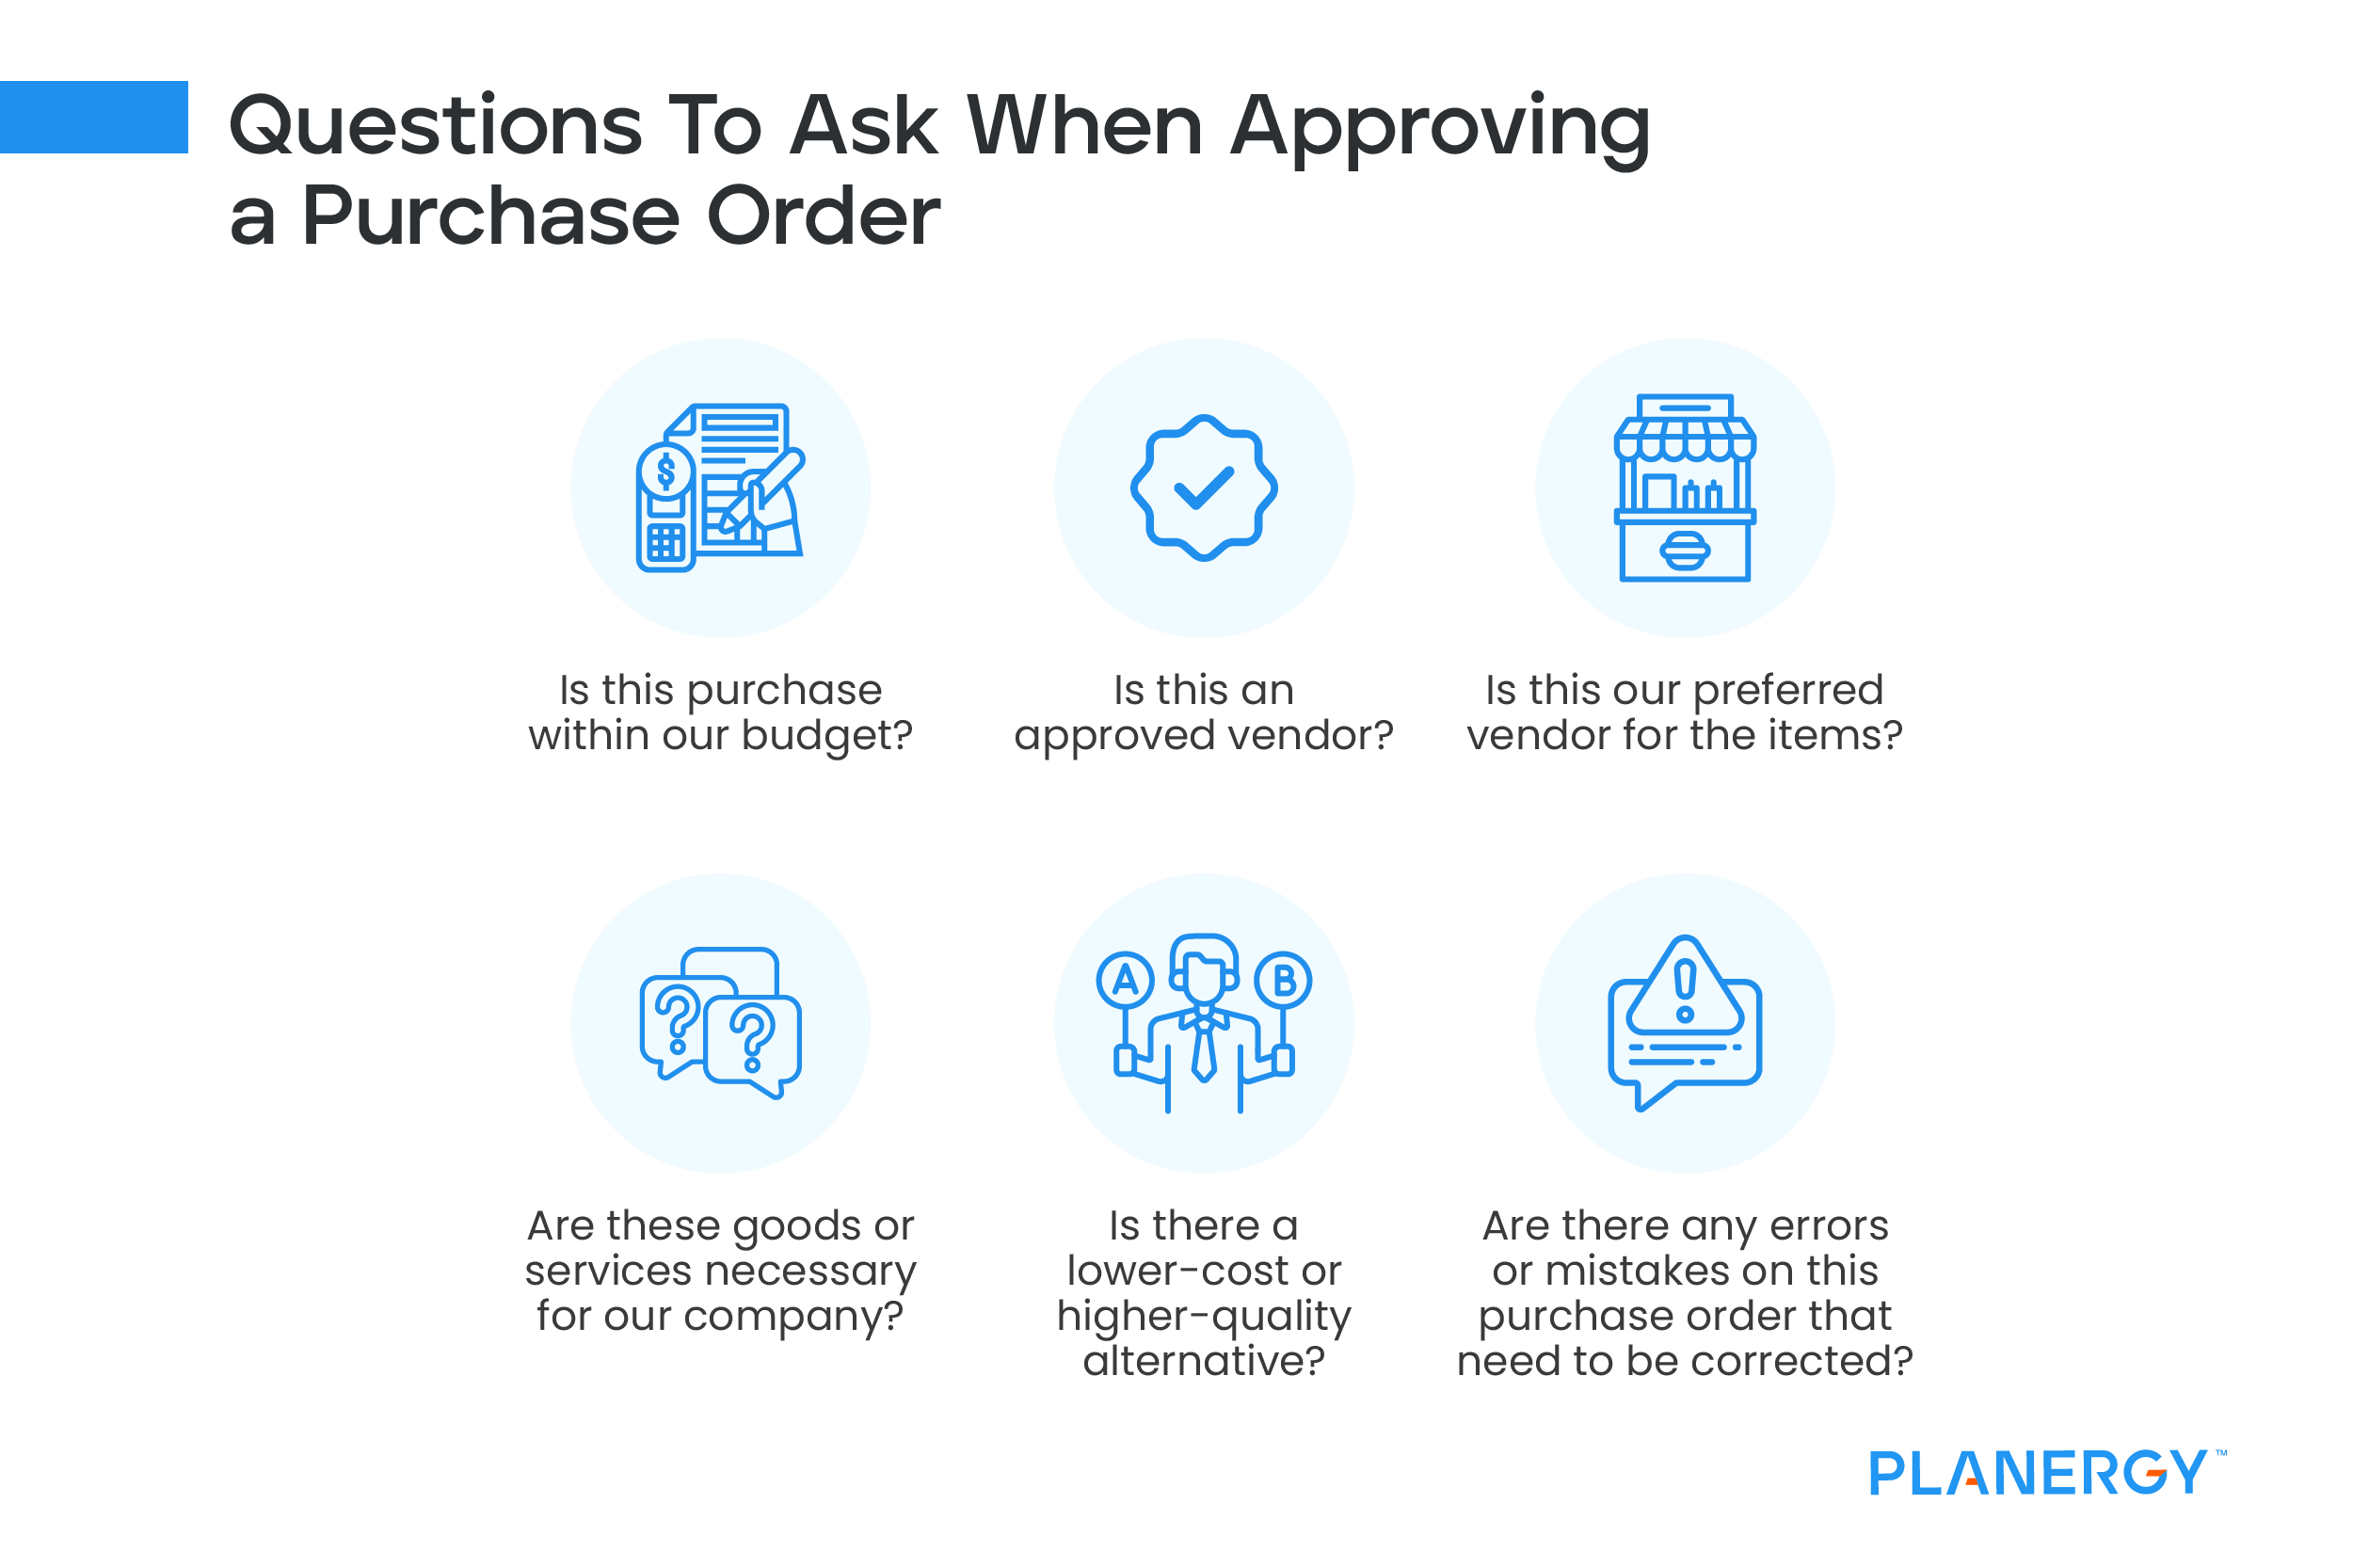 Questions to Ask When Approving Purchase Order